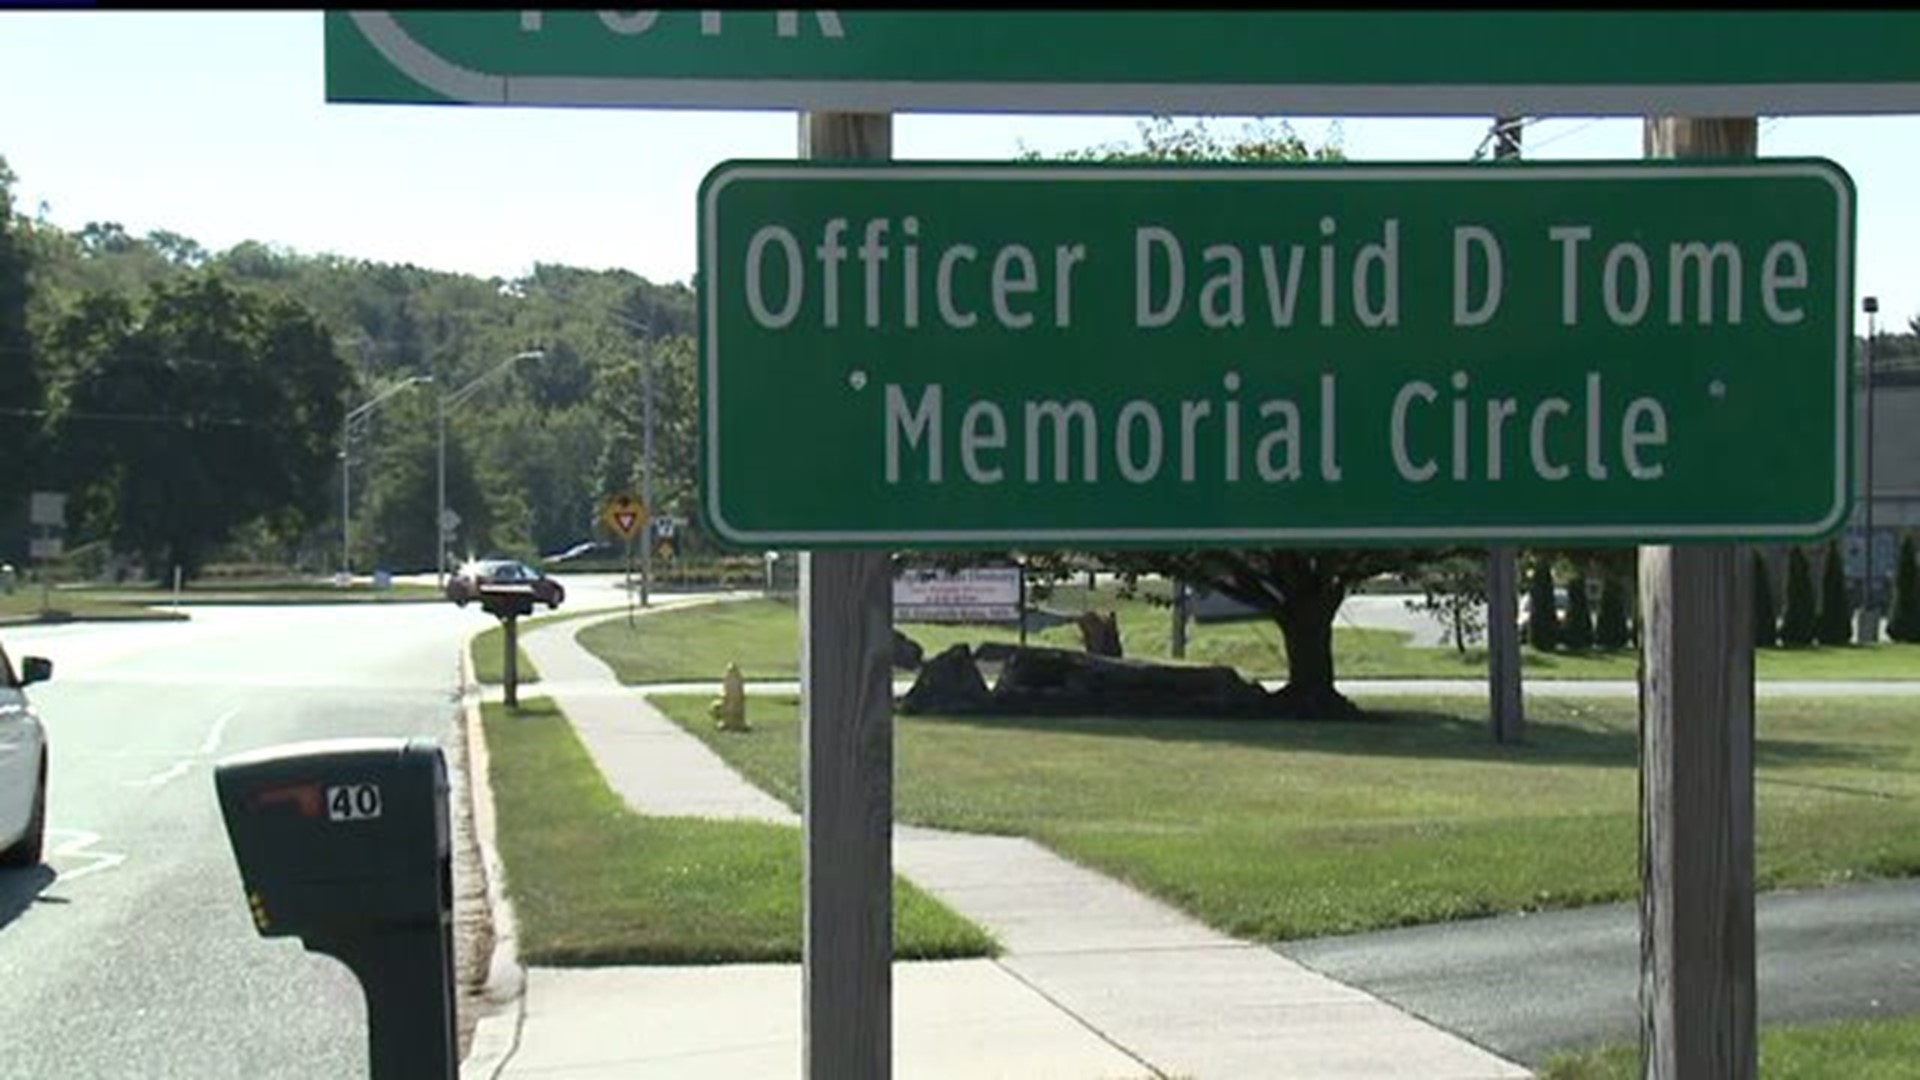 Traffic Circle in Spring Grove dedicated in honor of Officer David Tome